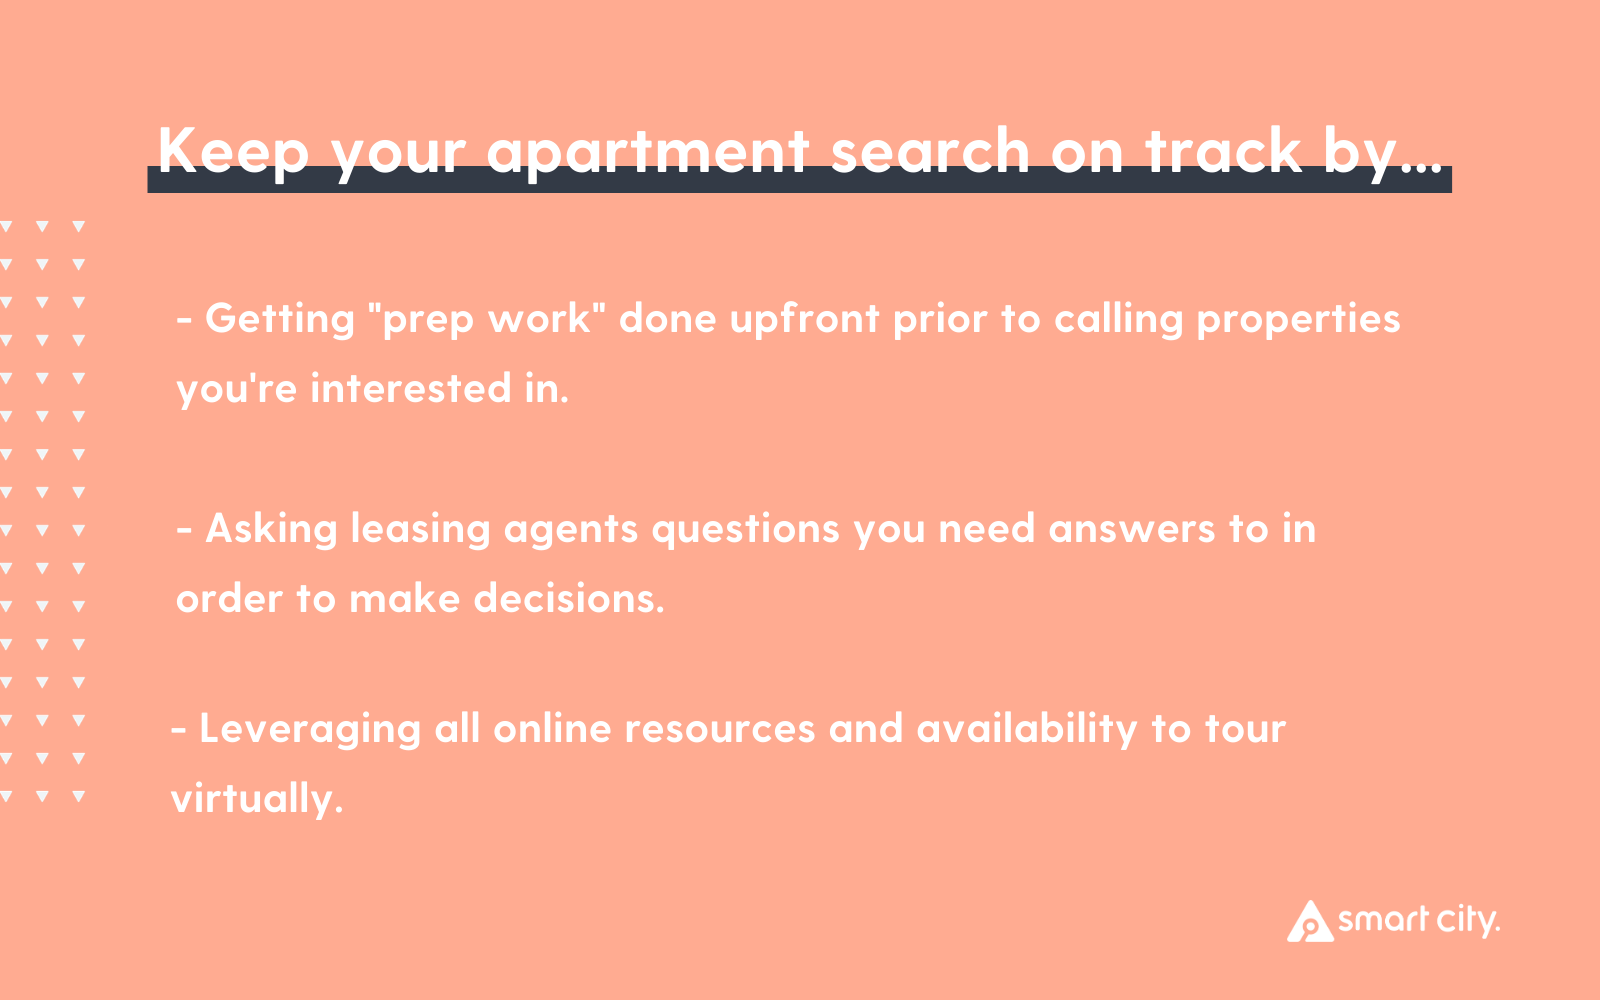 Ways to keep your apartment search on track